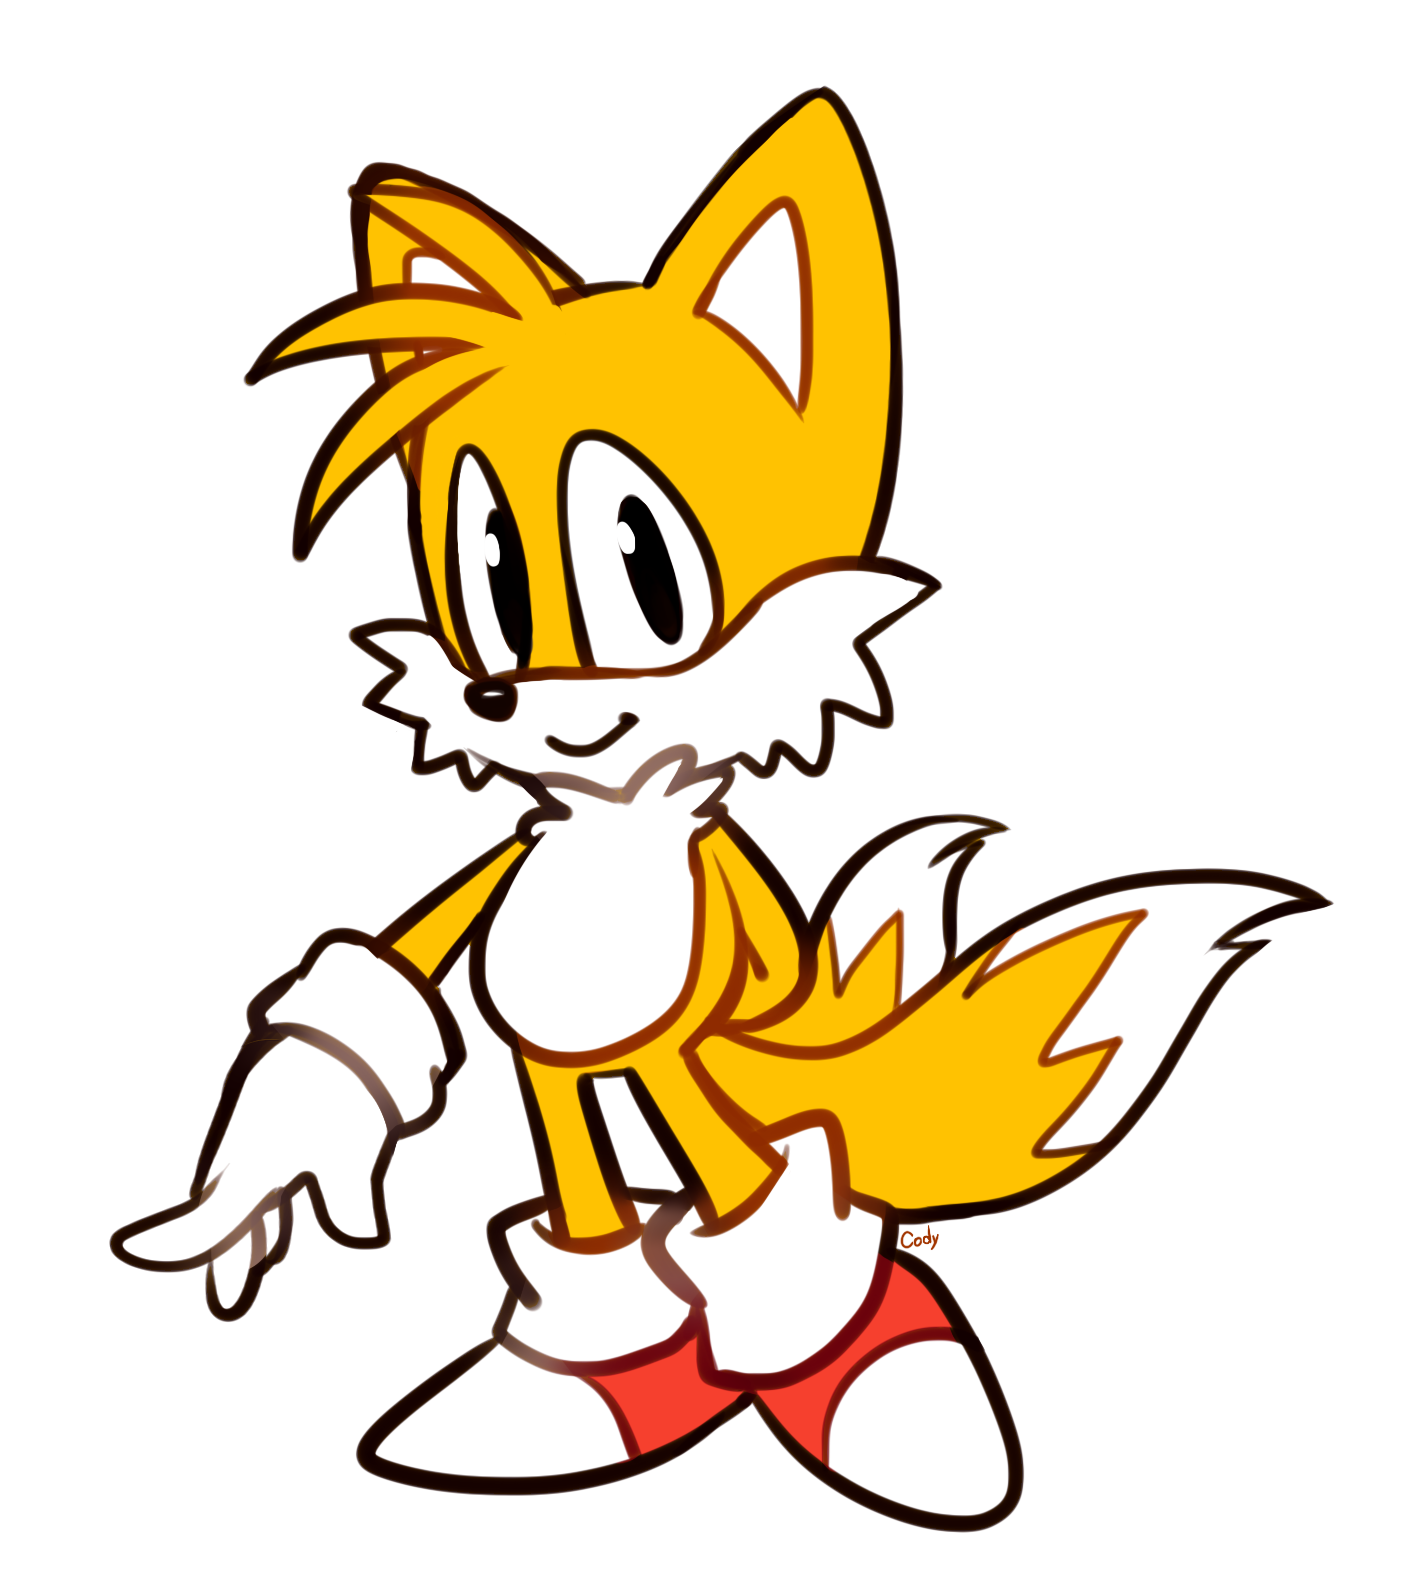 Classic Tails by PukoPop on DeviantArt